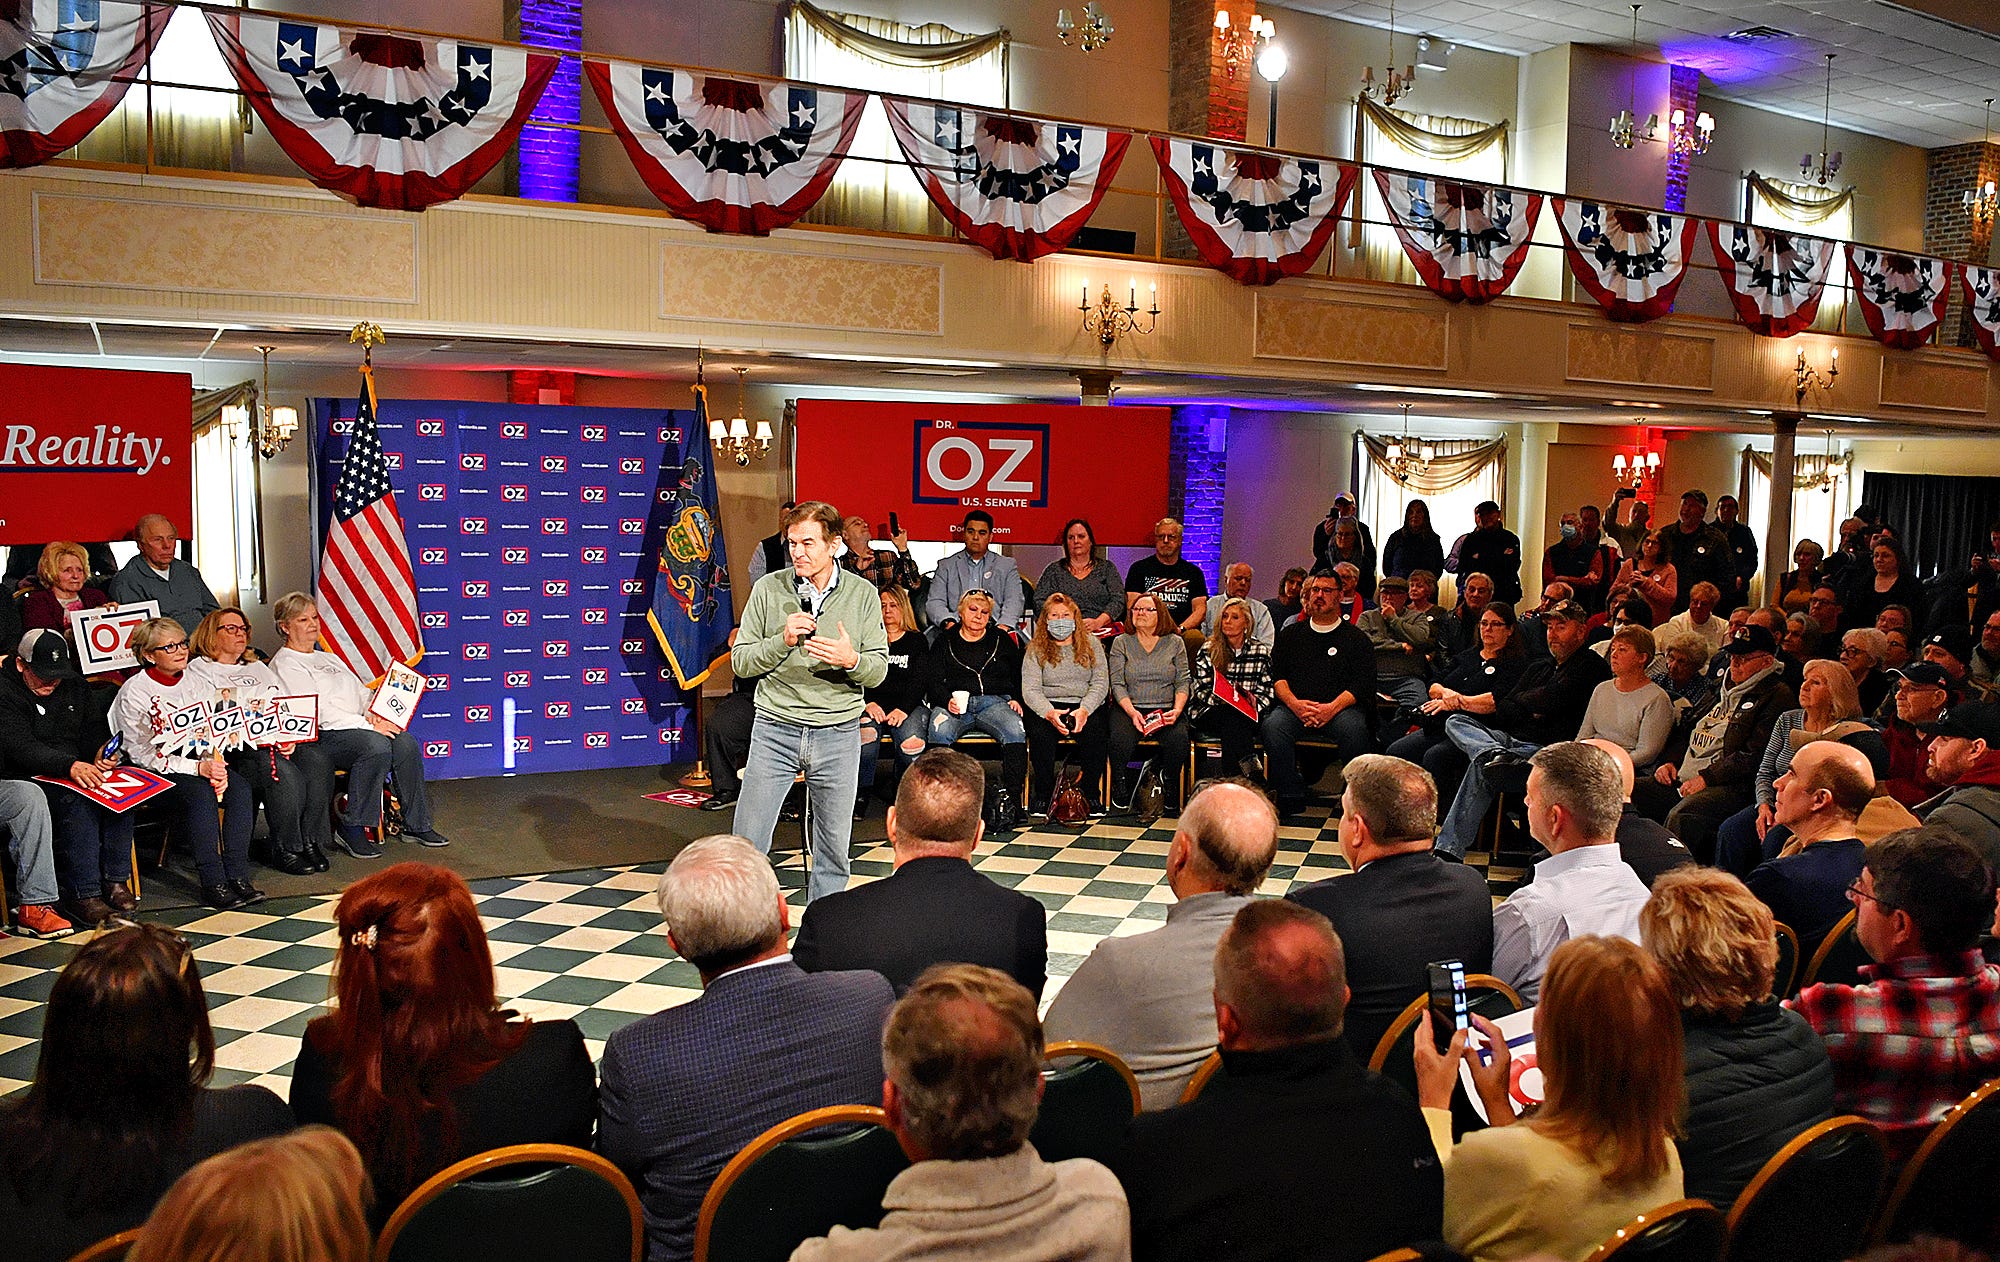 Event organizers estimate a crowd of 350 gather in support of Dr. Mehmet Oz as he makes his fourth campaign stop, for the Pennsylvania U.S. Senate seat resigned by U.S. Sen. Pat Toomey, at Wisehaven Event Center in Windsor Township, Saturday, Feb. 5, 2022. Dawn J. Sagert photo